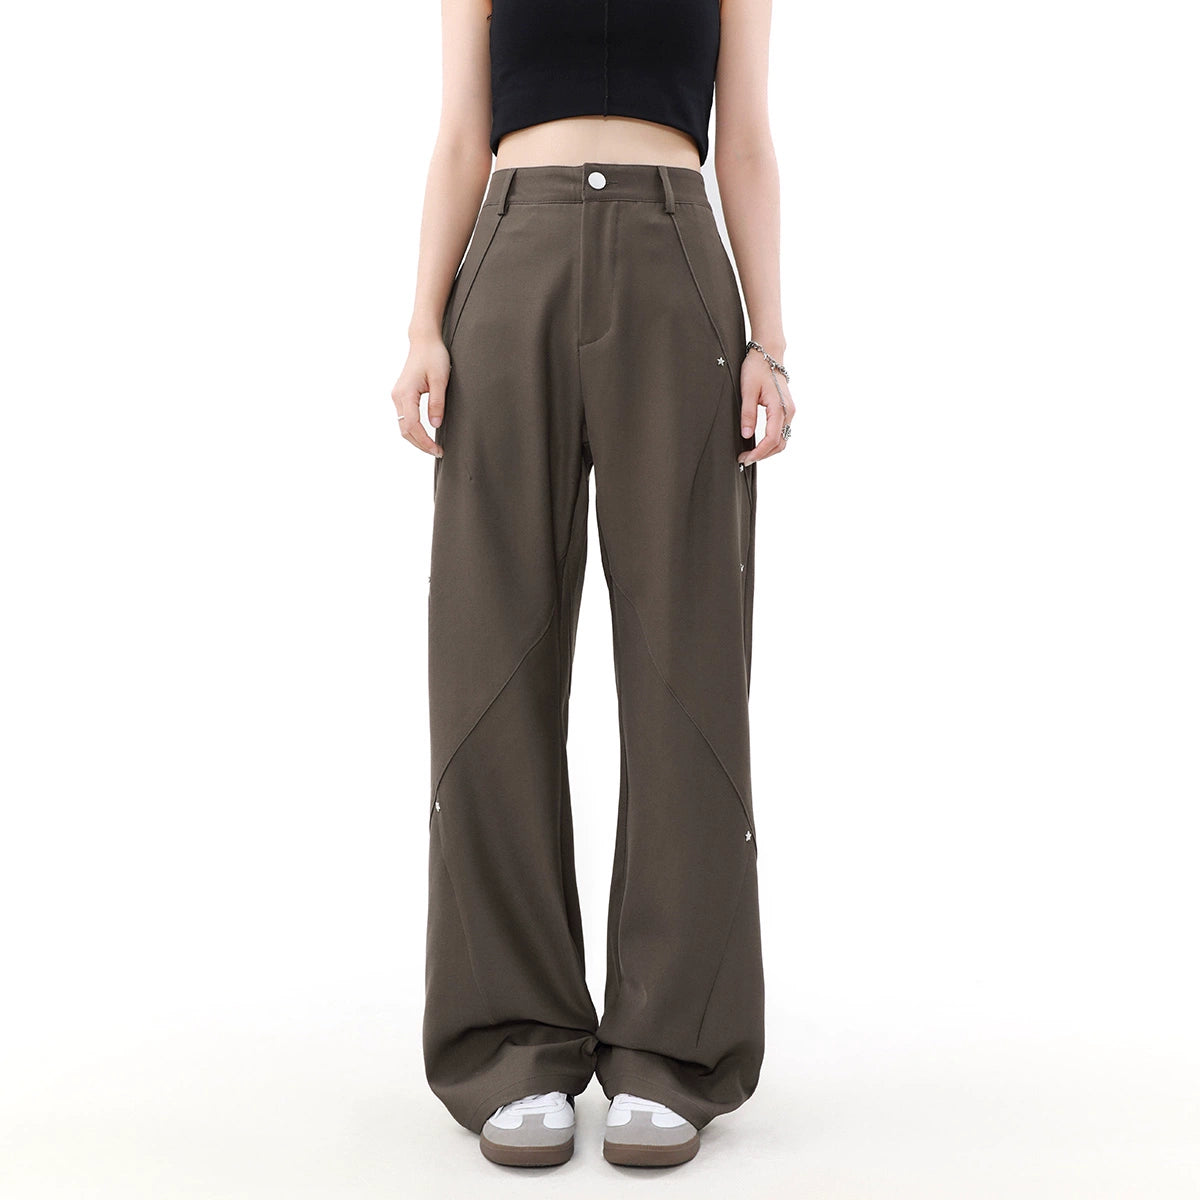 Scattered Minimal Stars Pants Korean Street Fashion Pants By Mr Nearly Shop Online at OH Vault